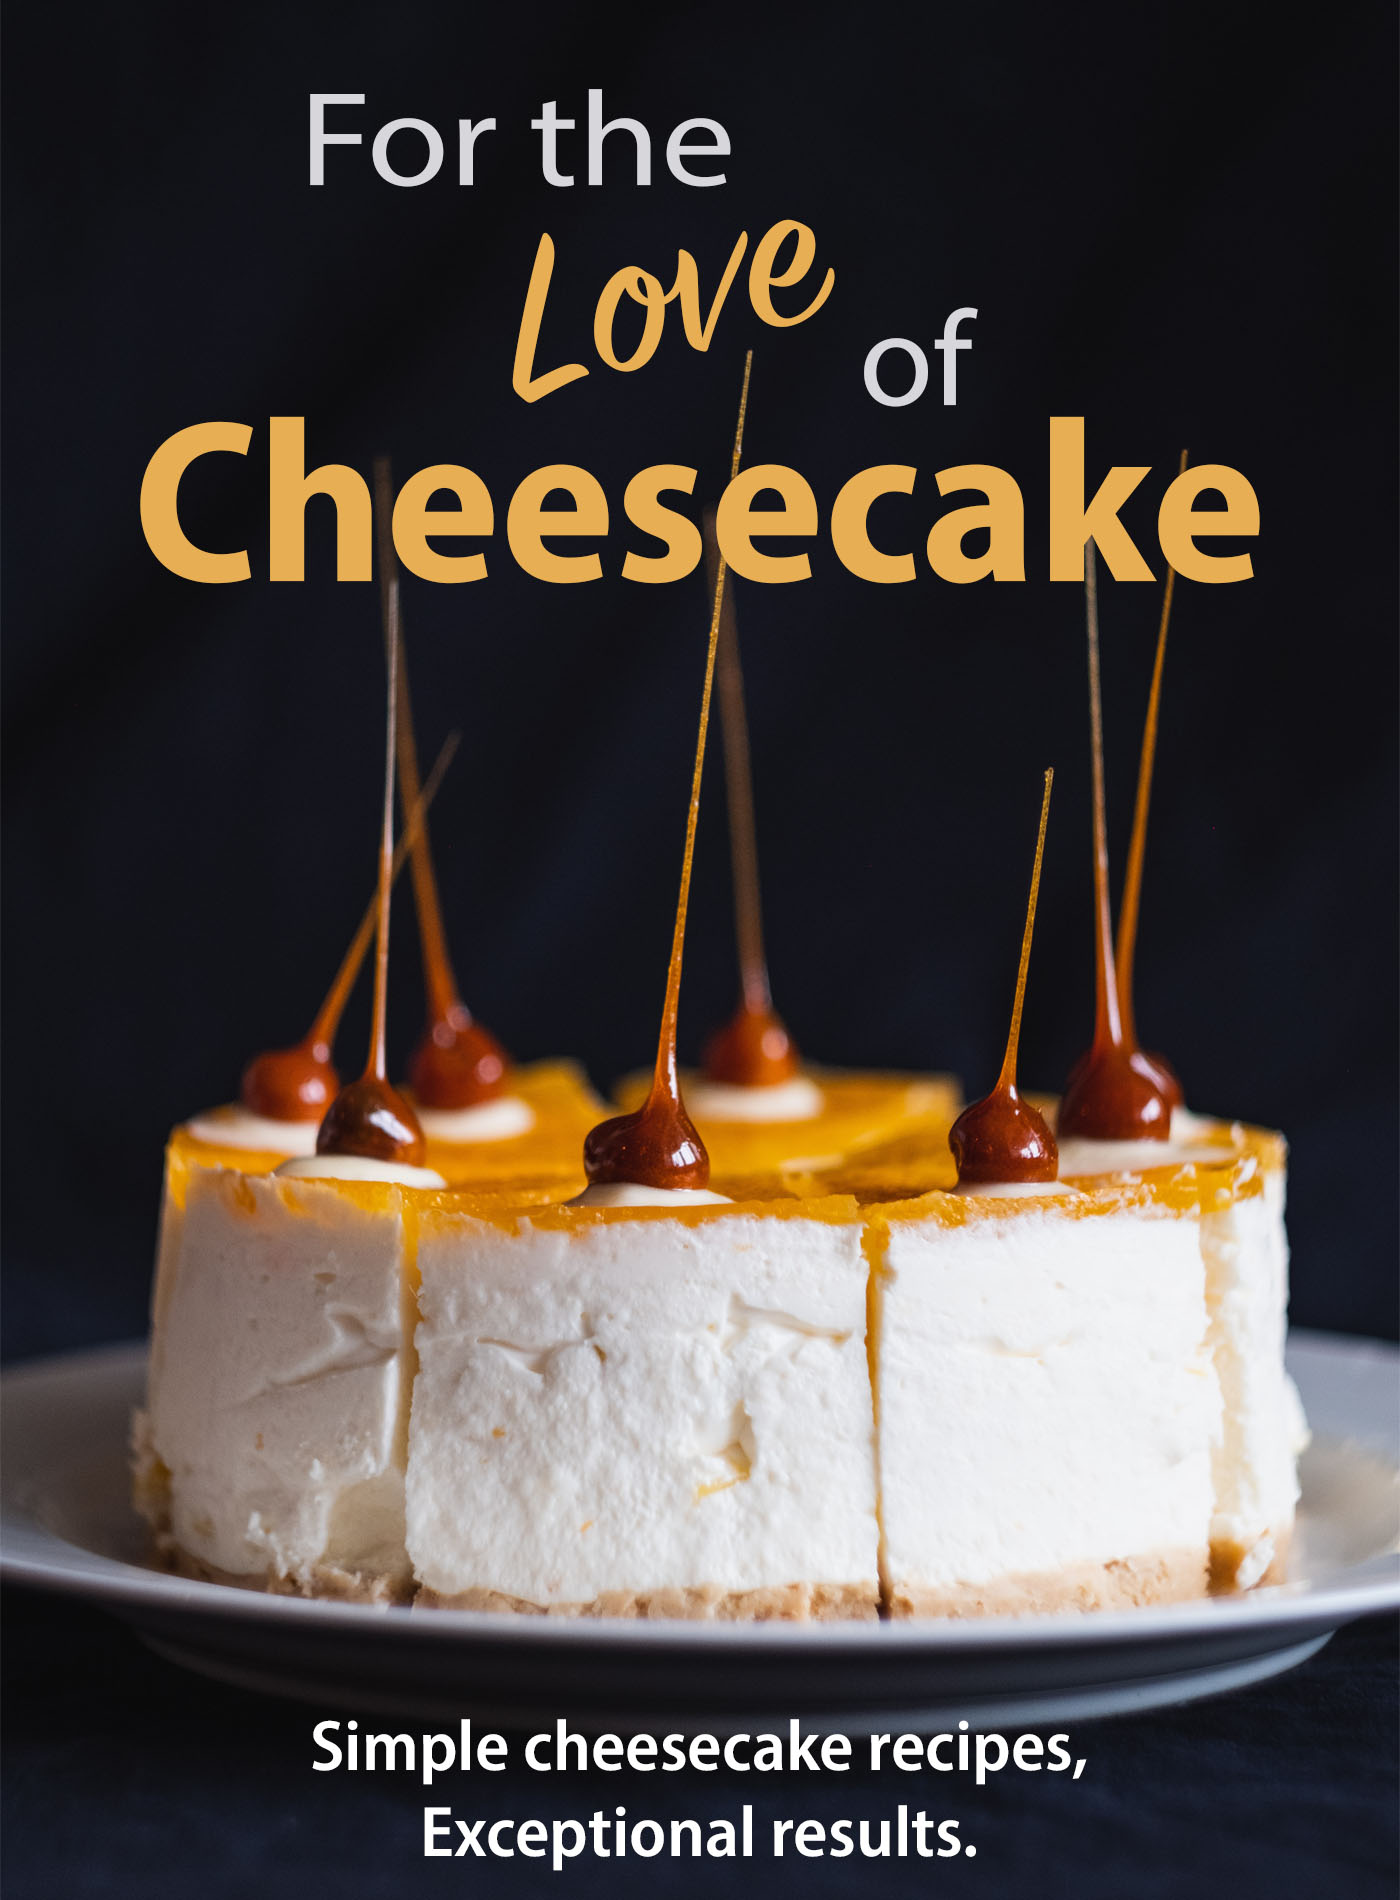 Recipe book title against picture of cheesecake 